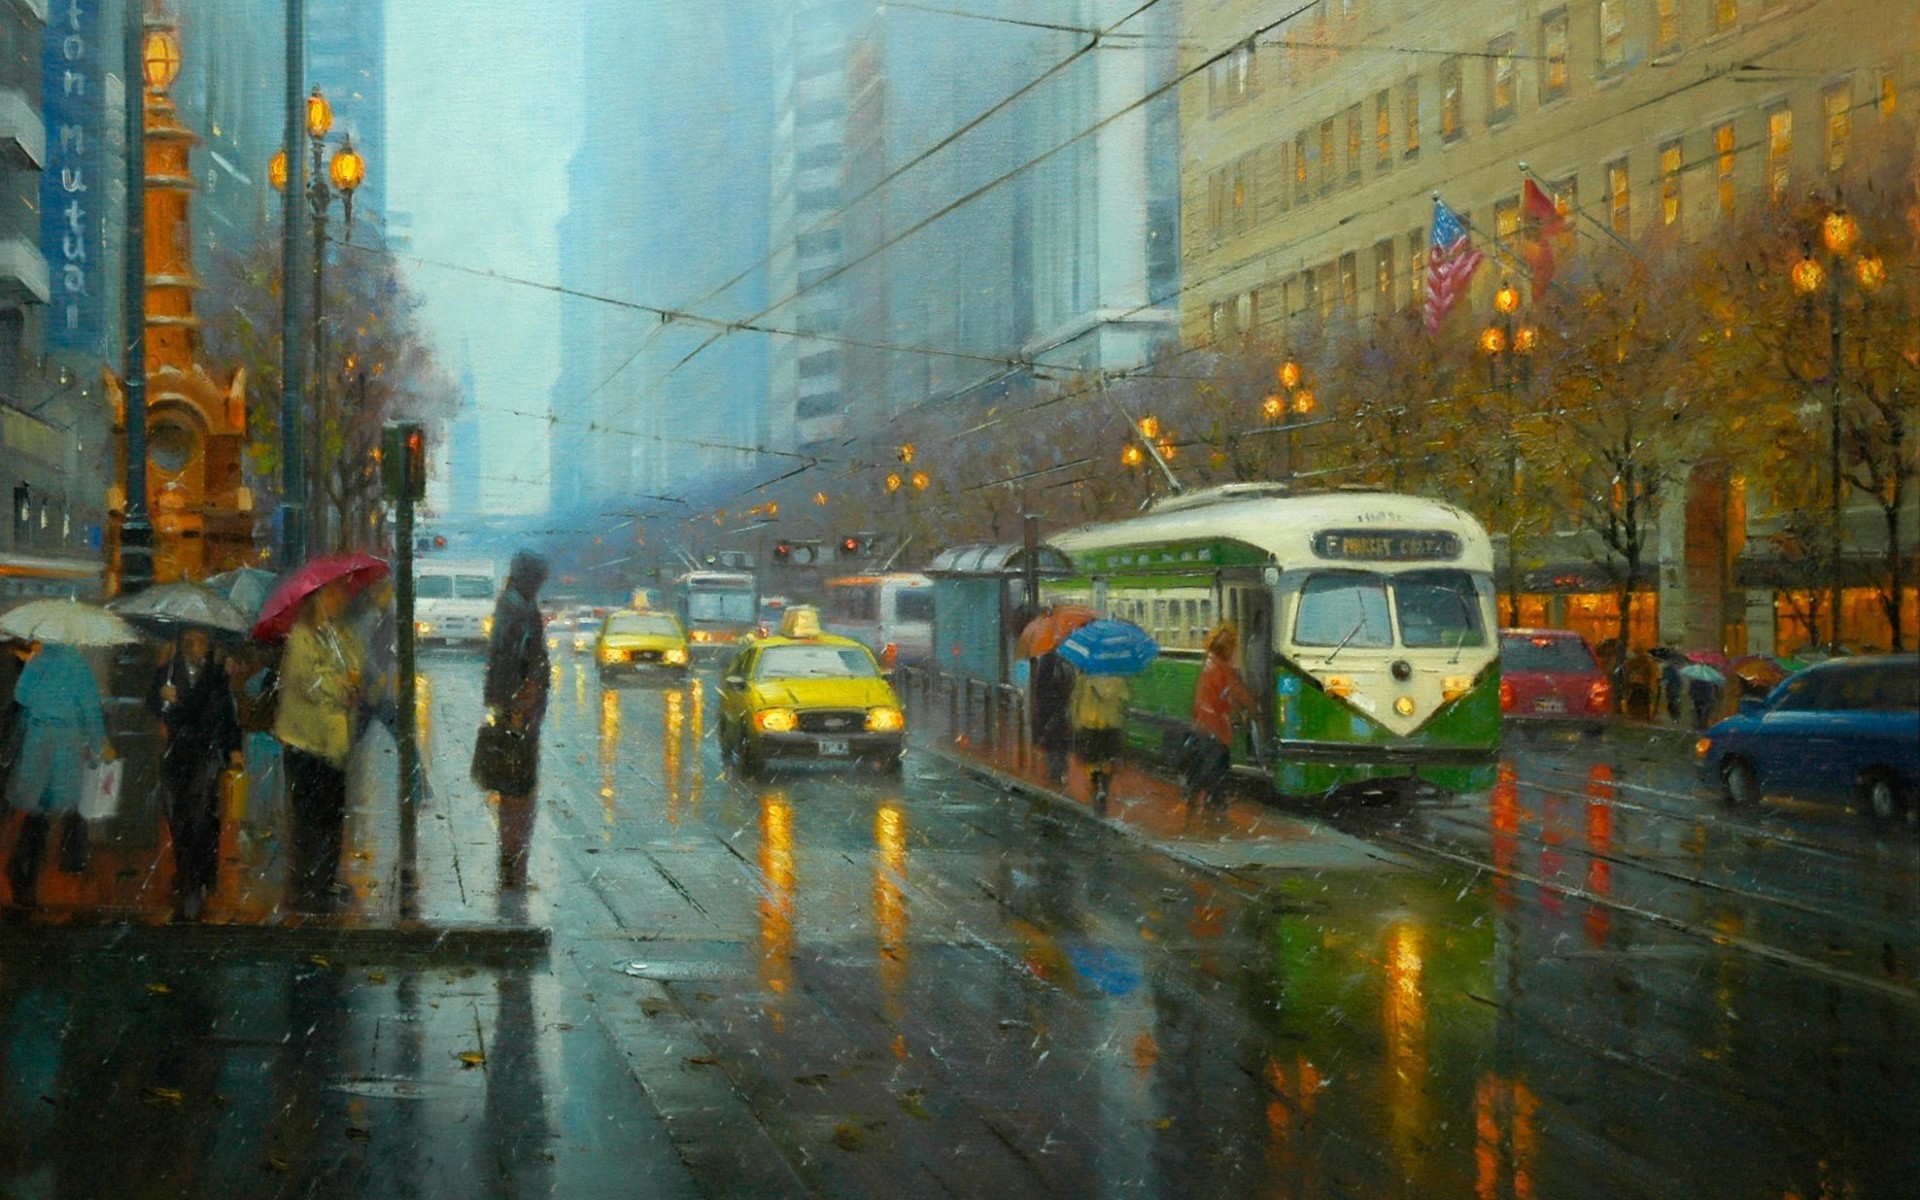 painting, Art, Po, Pin, Lin, Street, City, Rain, Tram, People, Umbrellas, Taxi, Lights, Lamps, Lights, Cars, Road, Wire, Flags, America Wallpaper